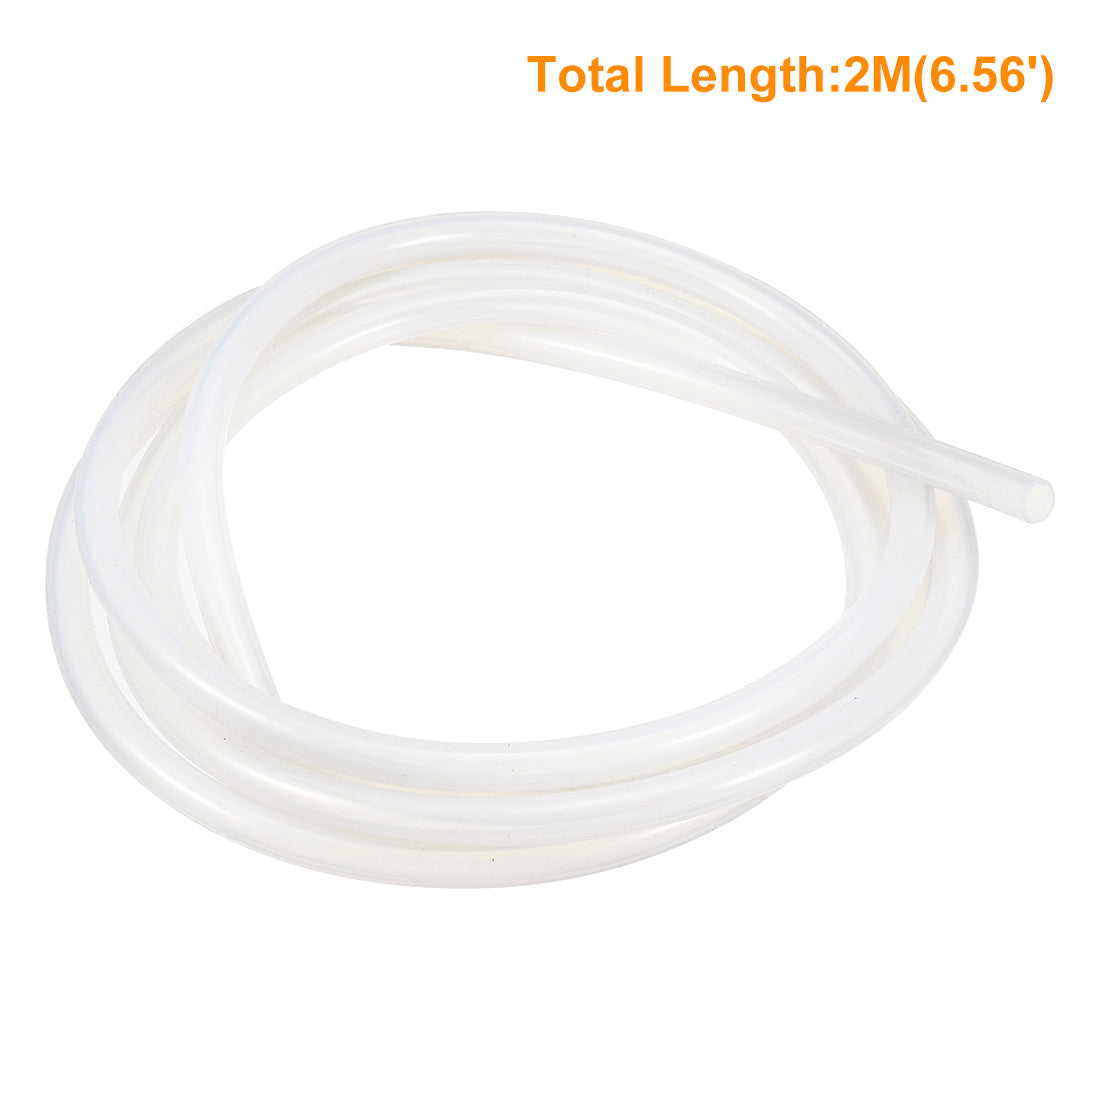 uxcell Uxcell Silicone Tube 2 M Flexible Silicone Rubber Tubing Water Air Hose Pipe for Pump Transfer